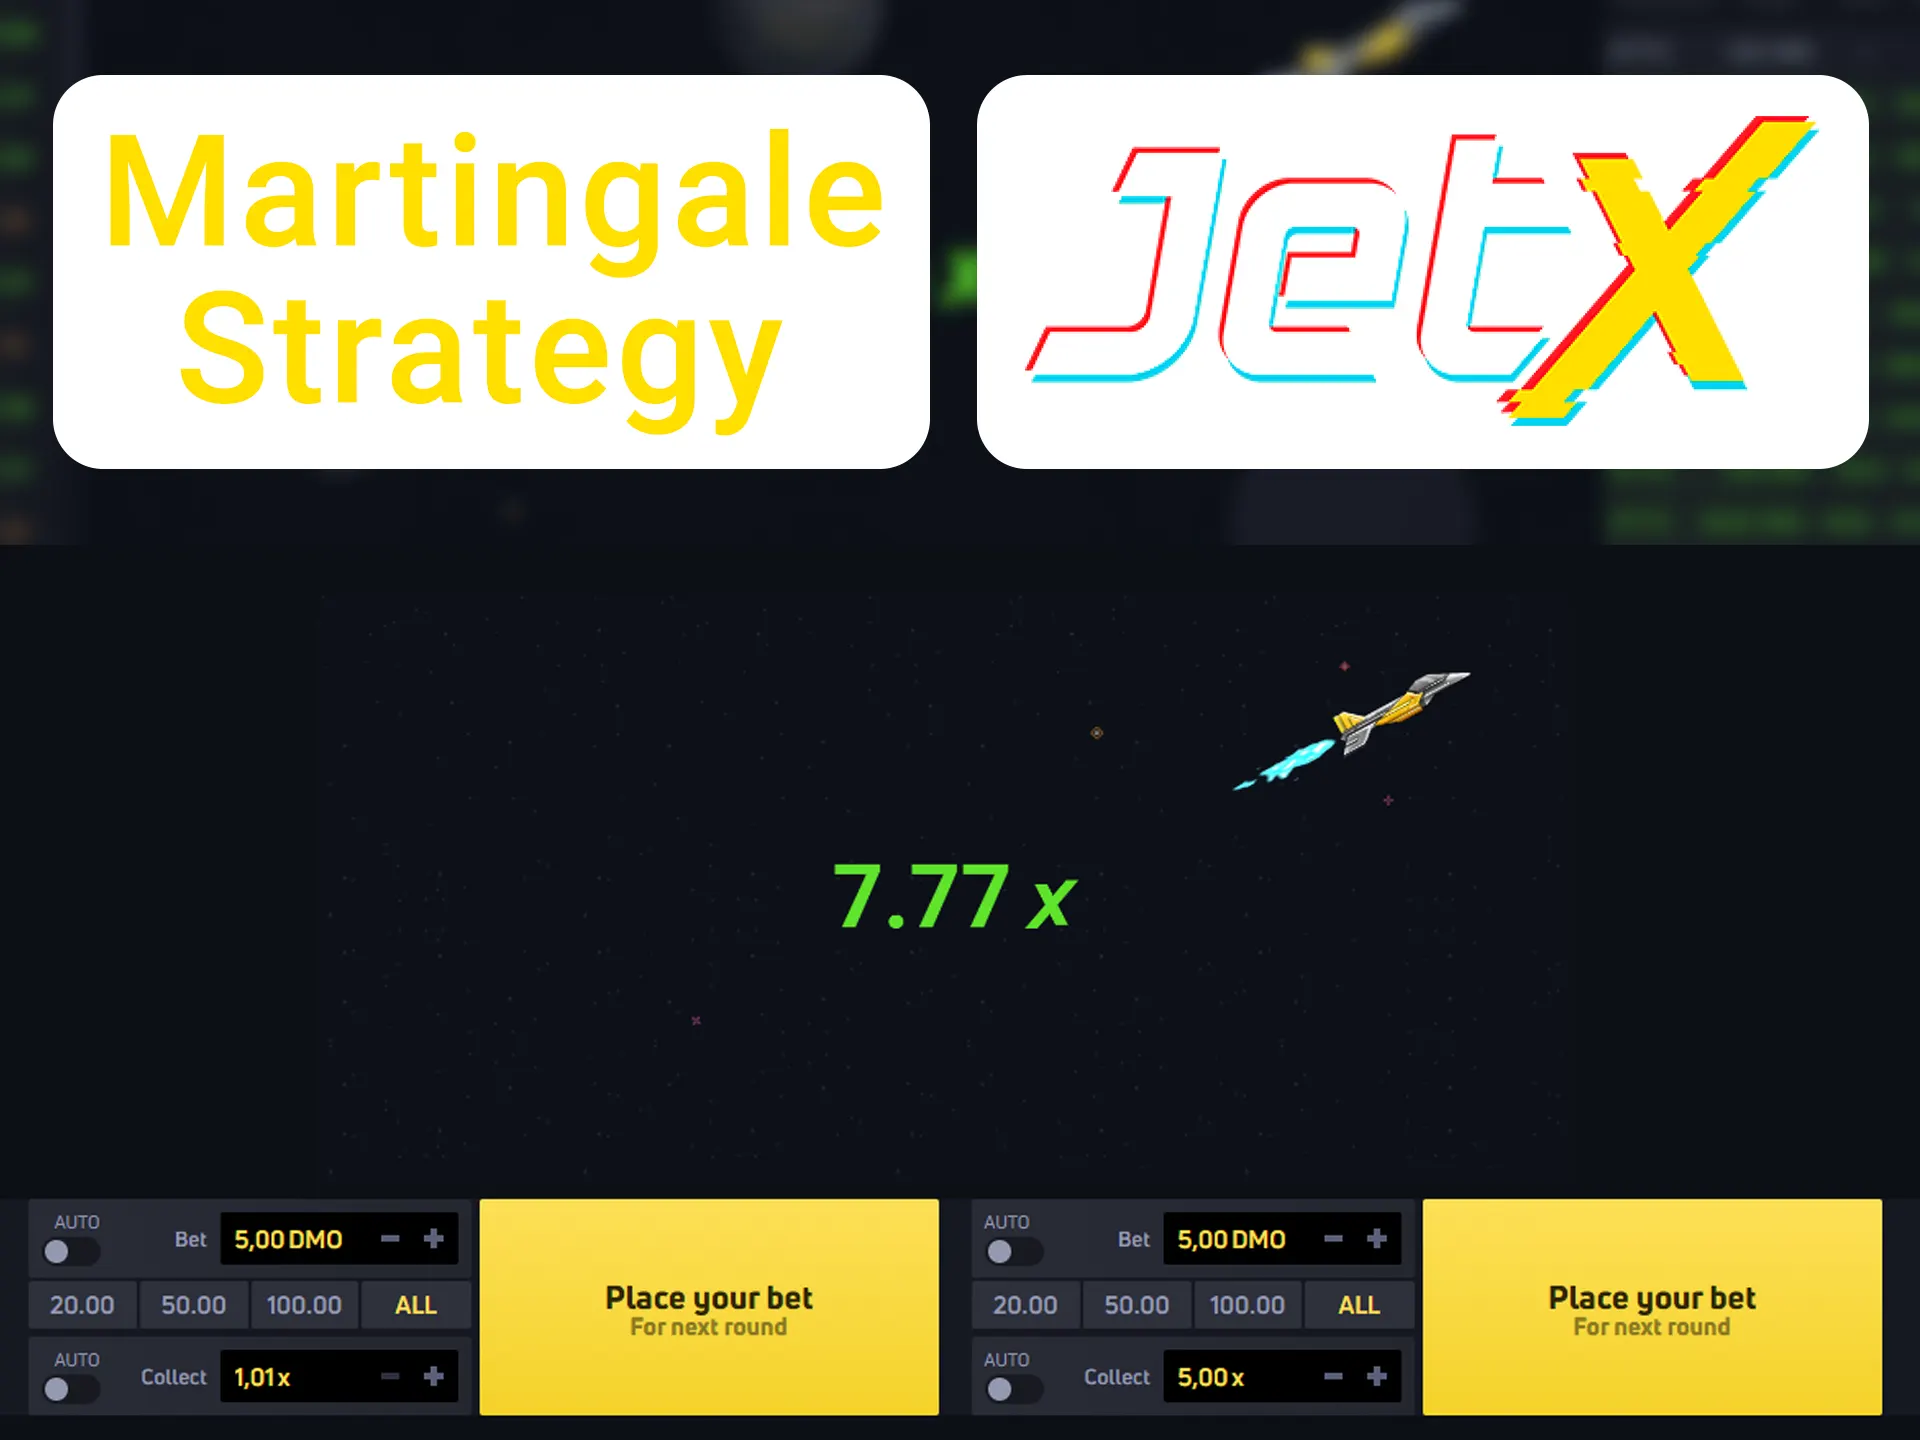 Try the Martingale strategy when playing the JetX game.